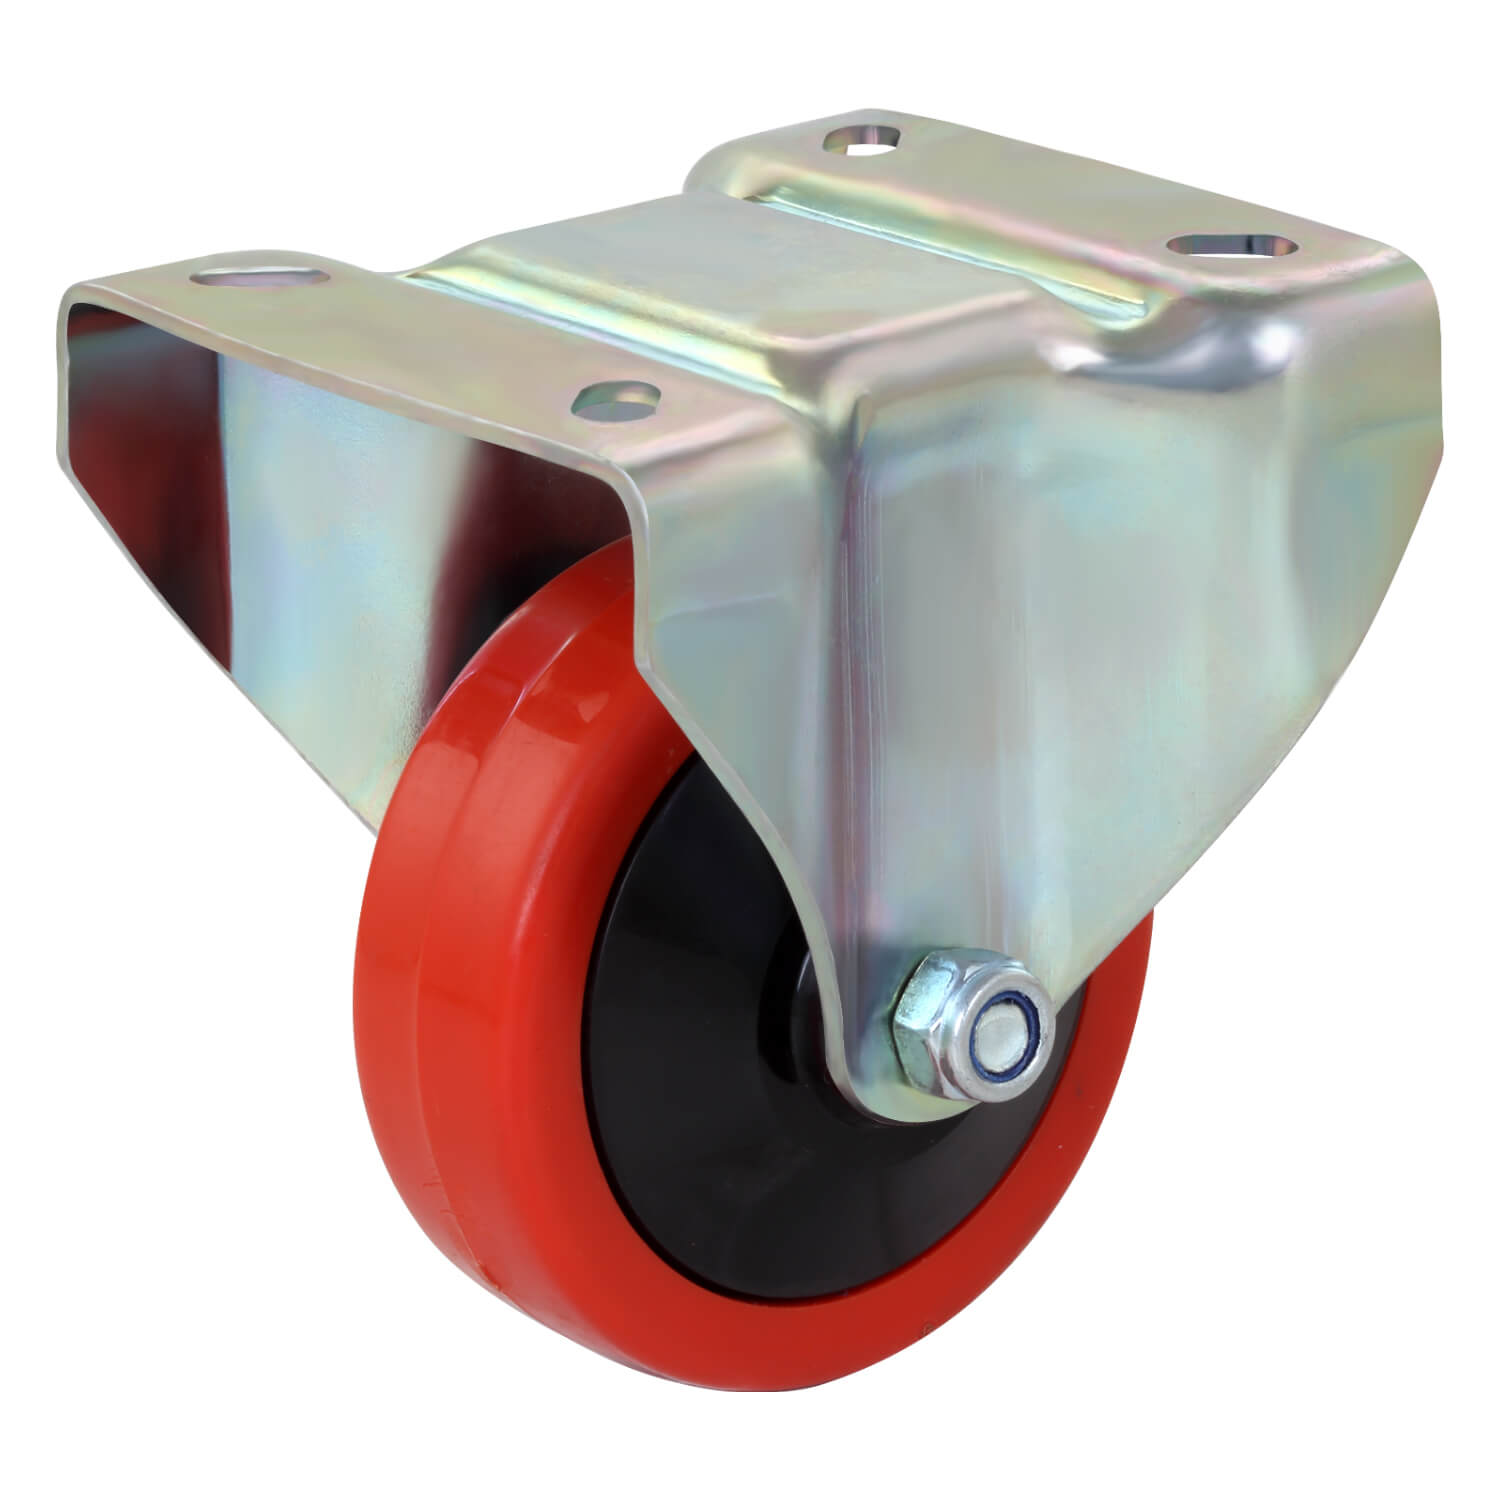 Caster Wheels: Types, Applications, Benefits, and Manufacturing